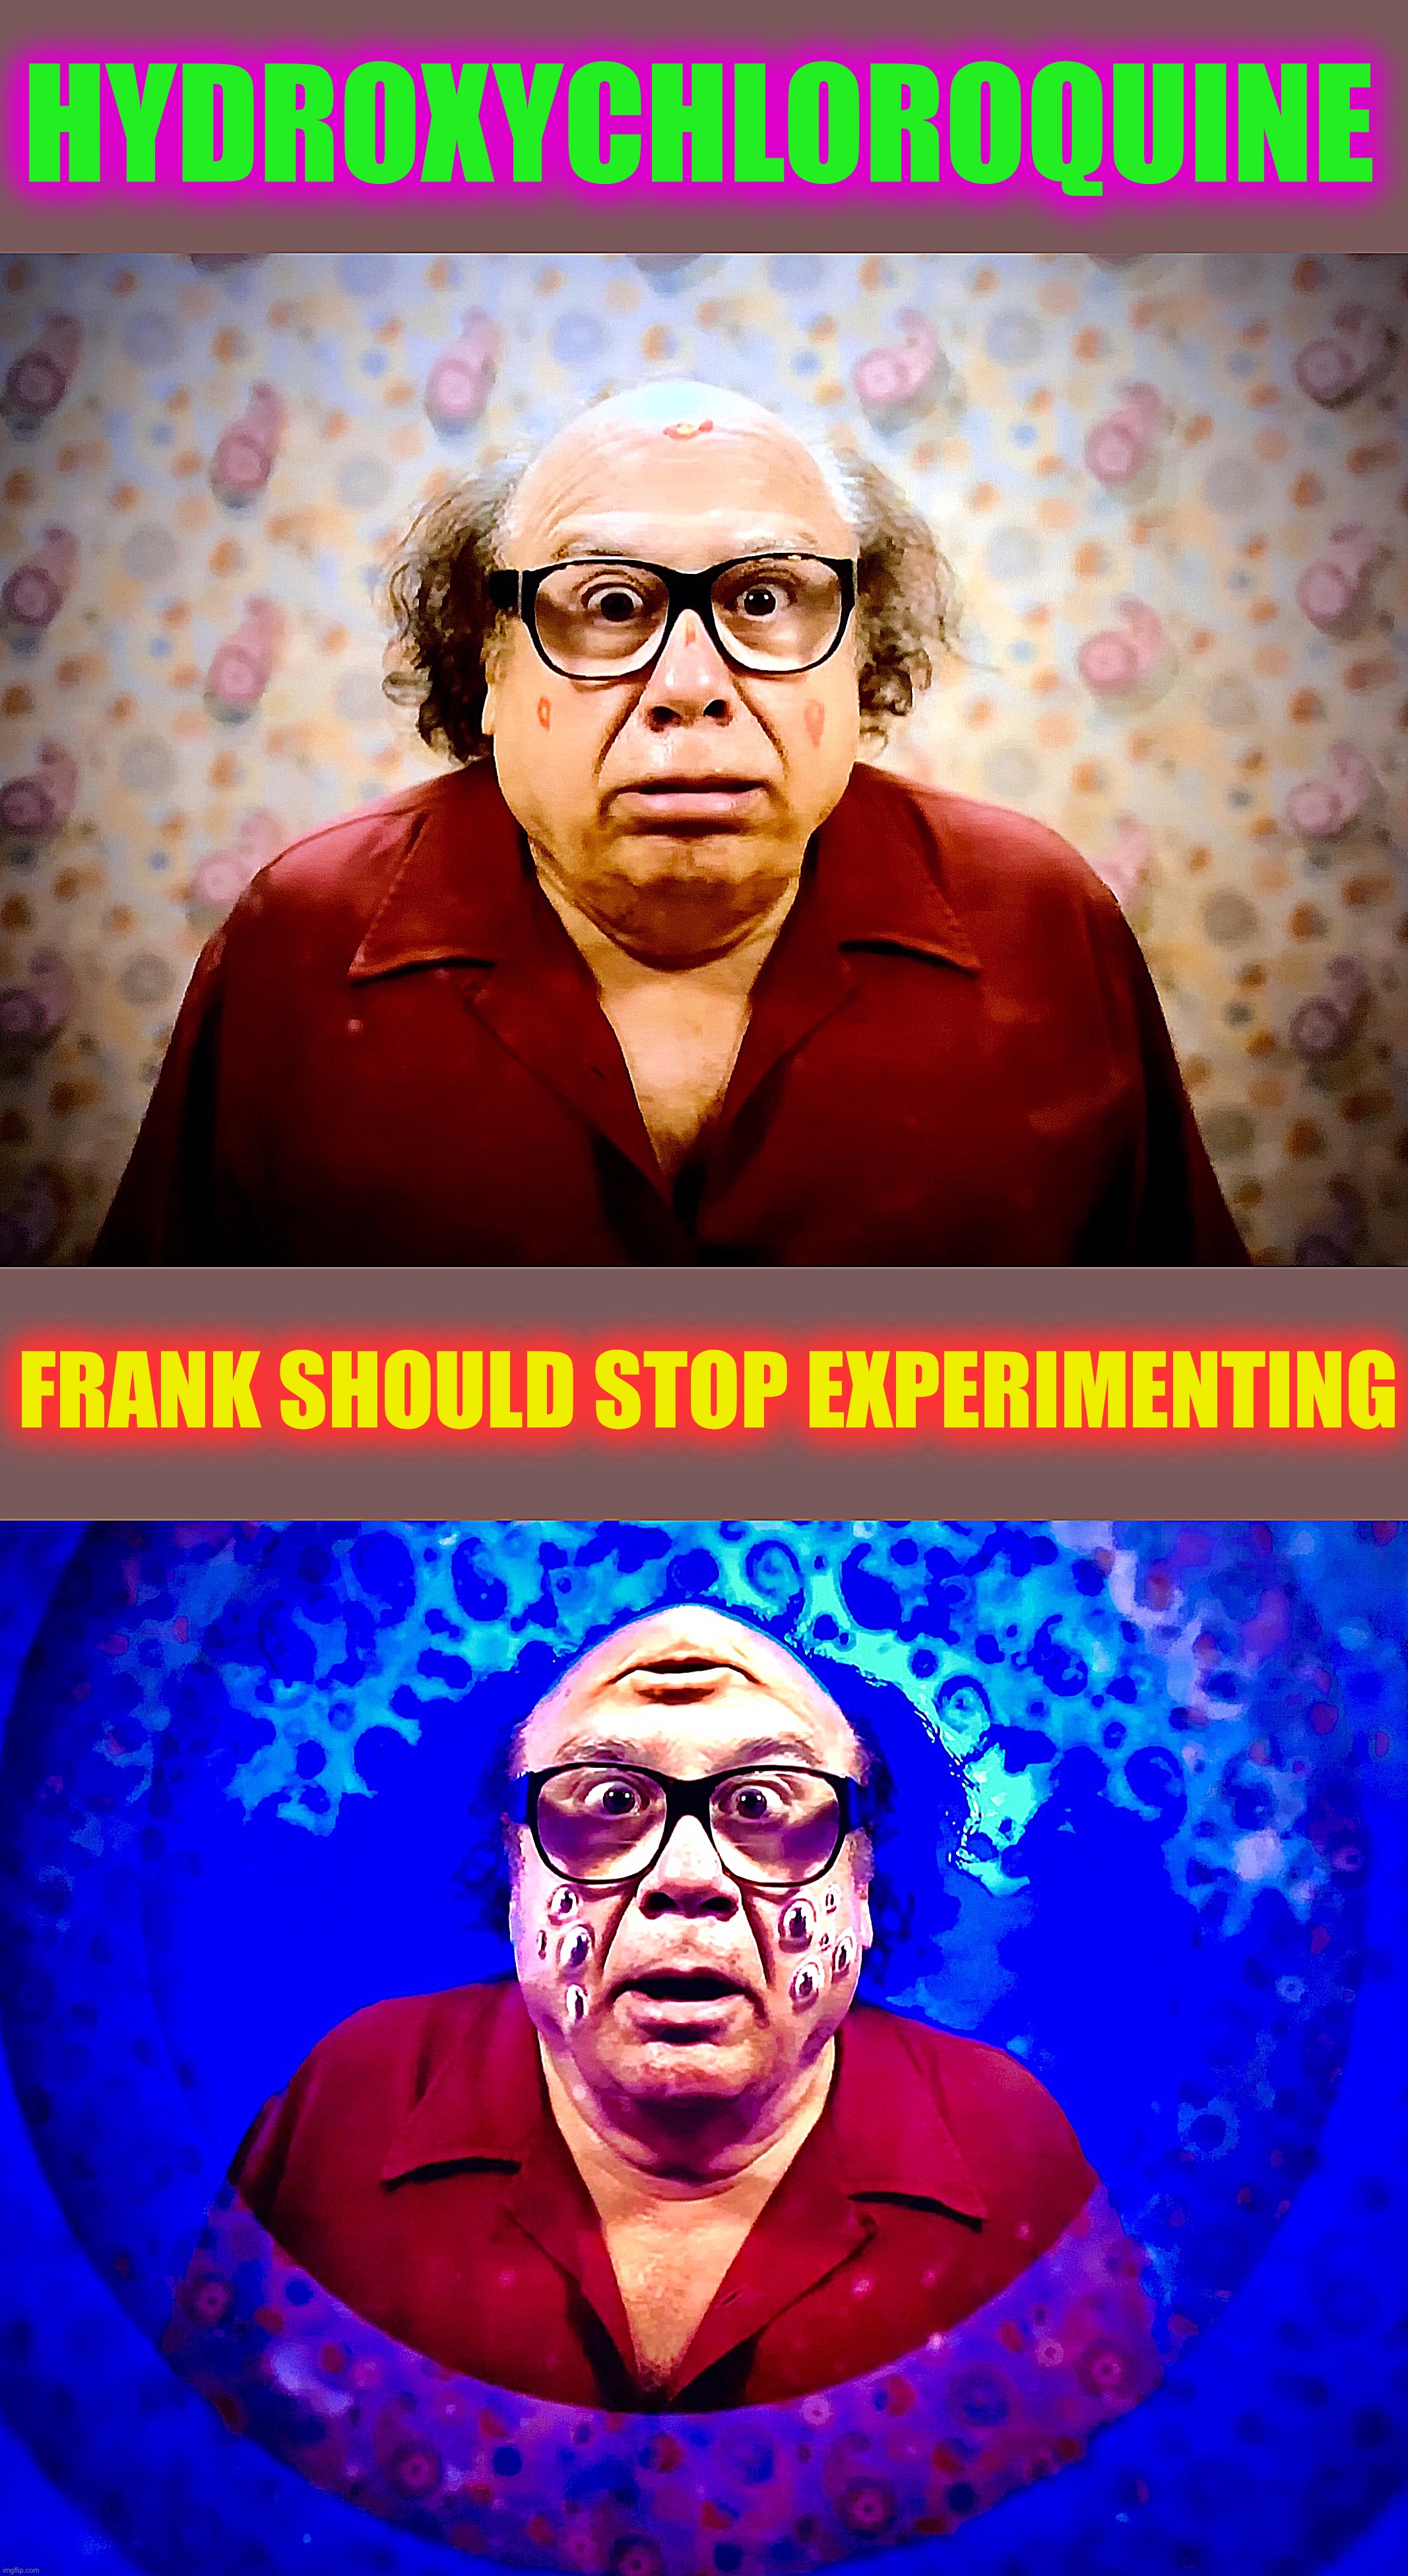 Trump said it was ok | HYDROXYCHLOROQUINE; FRANK SHOULD STOP EXPERIMENTING | image tagged in frank reynolds,tripping balls,memes,drugs,donald trump approves,maga | made w/ Imgflip meme maker